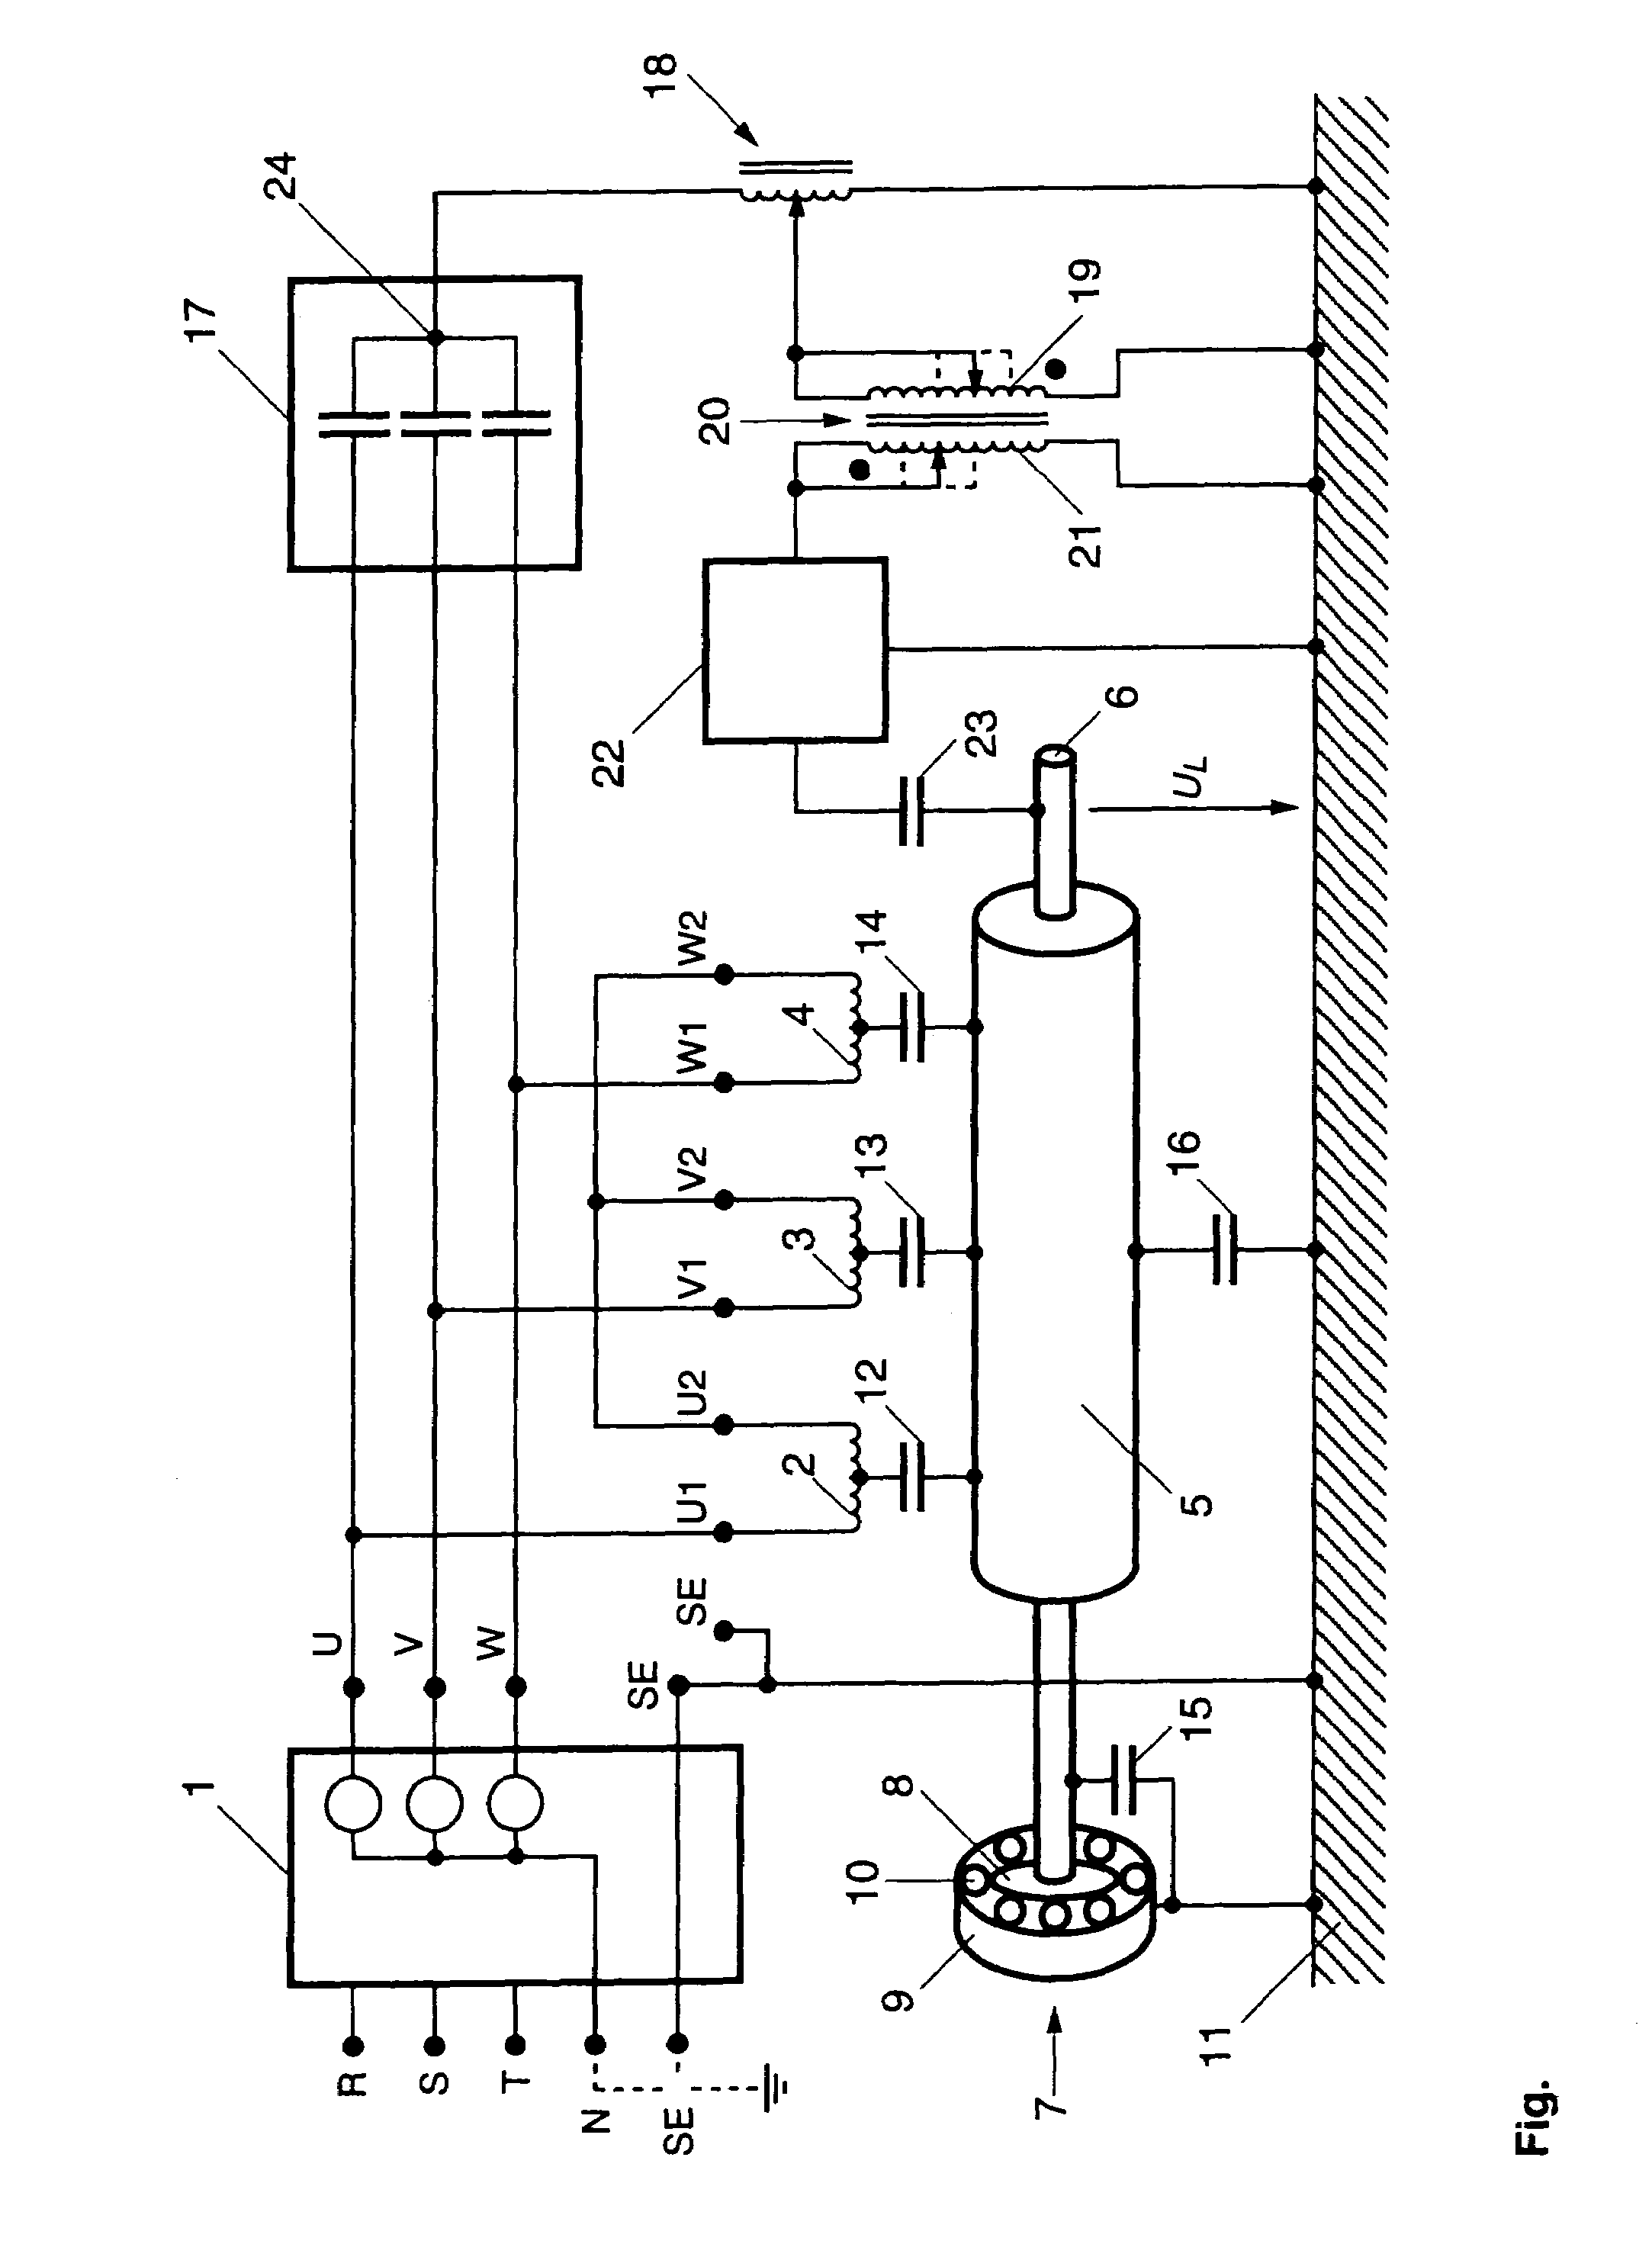 Device for protection of the bearing of an electrical machine against damaging passage of current